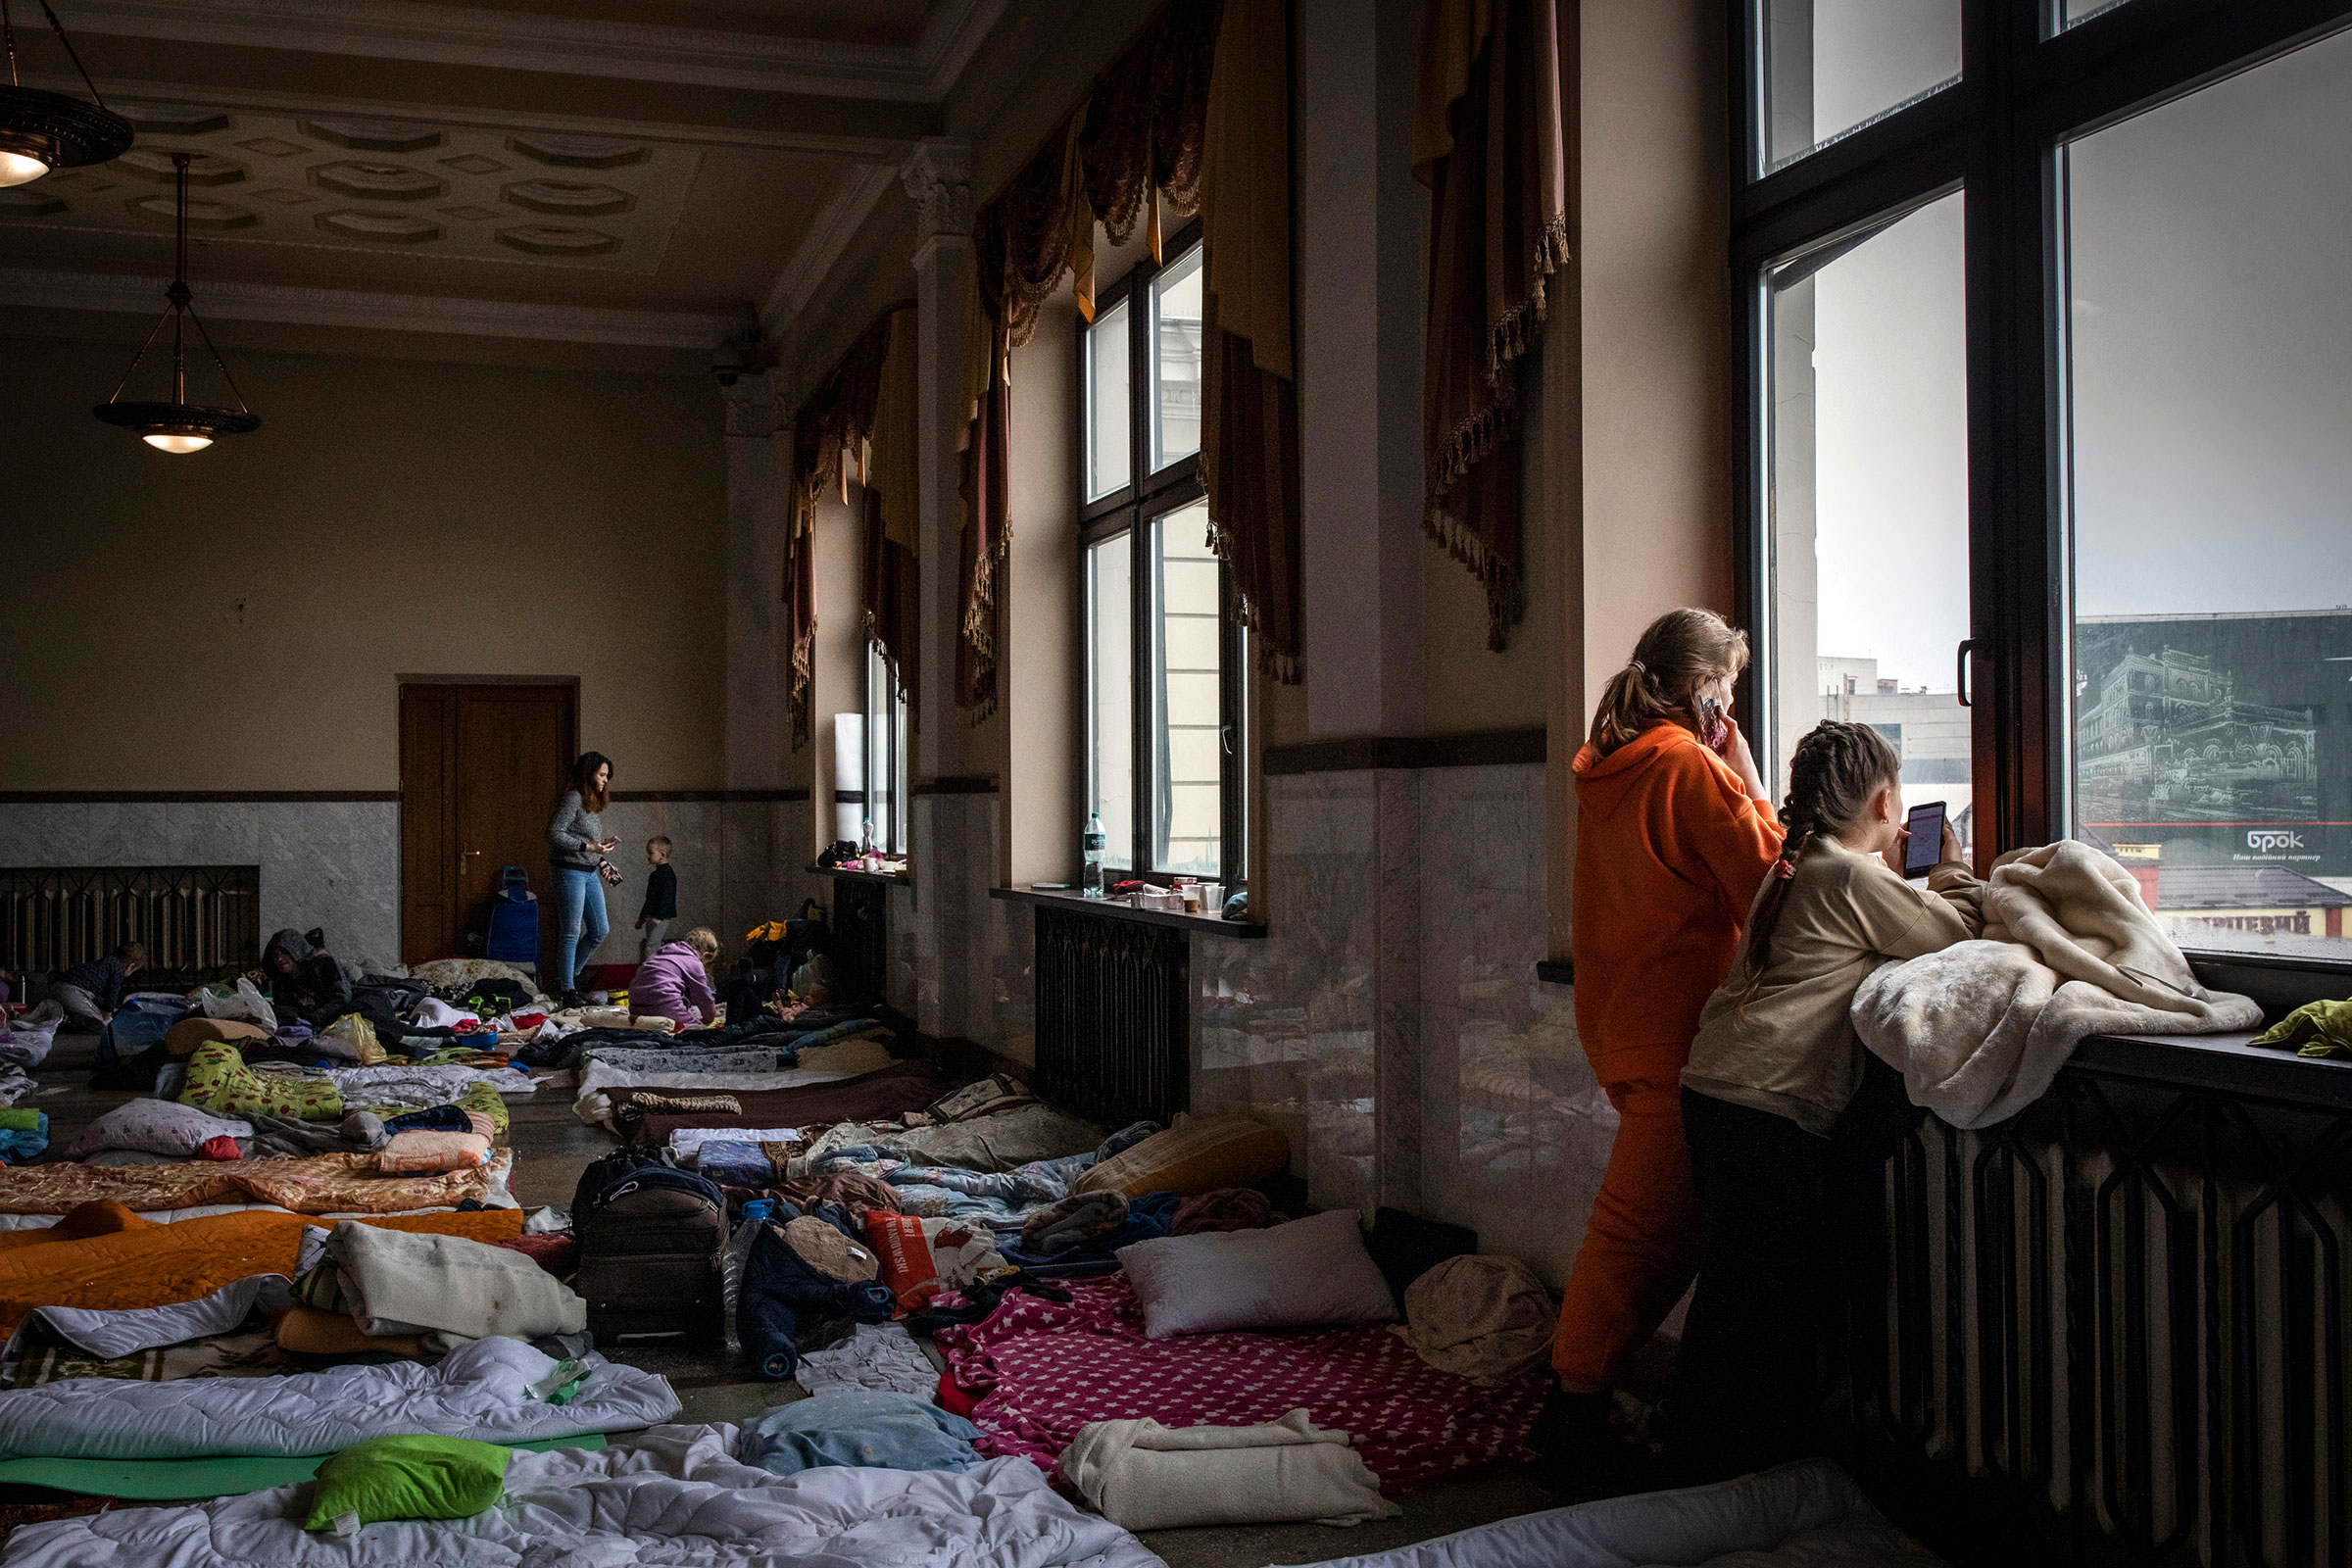 Women and children, many of them from the besieged city of Kharkiv in eastern Ukraine, shelter in a waiting hall at the train station in Lviv on March 7. (Ivor Prickett—The New York Times/Redux)